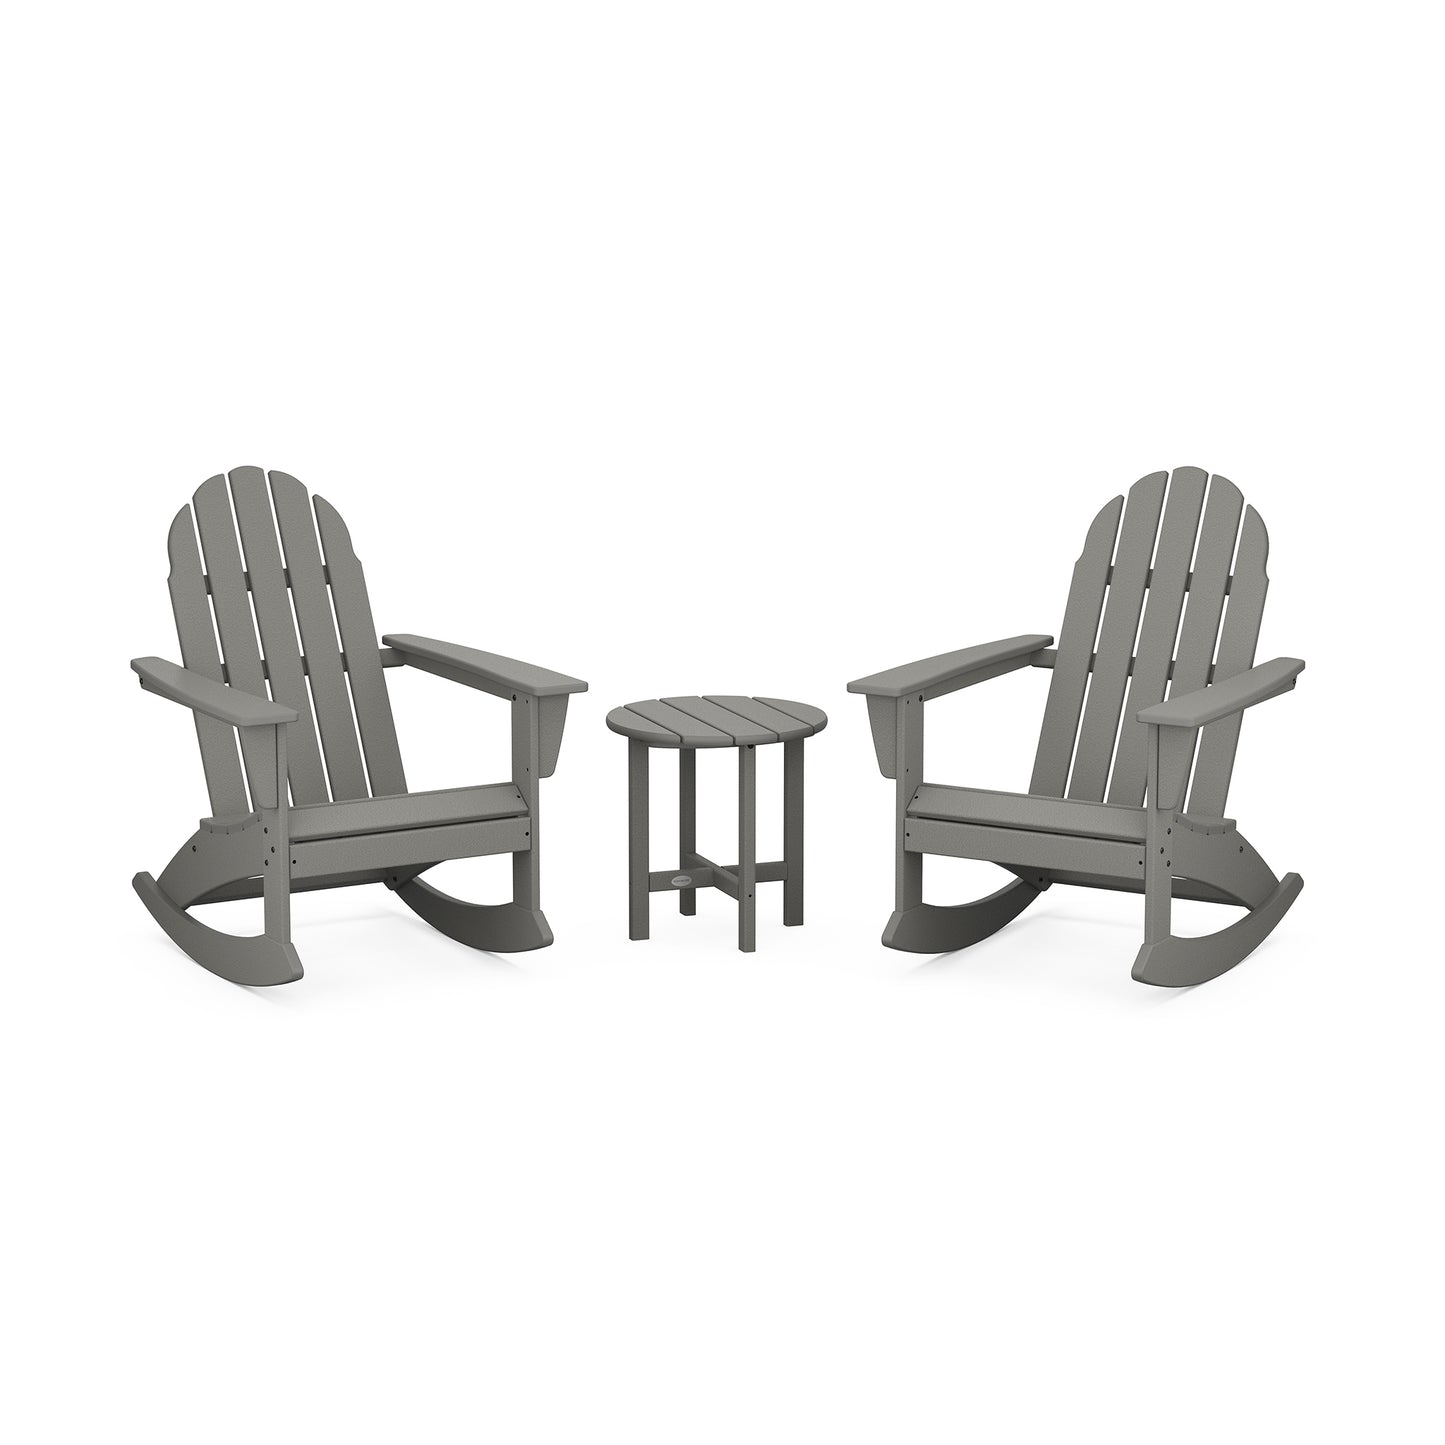 Two gray POLYWOOD Vineyard 3-Piece Adirondack Rocking Chair Sets facing each other with a small round table between them, set against a white background.